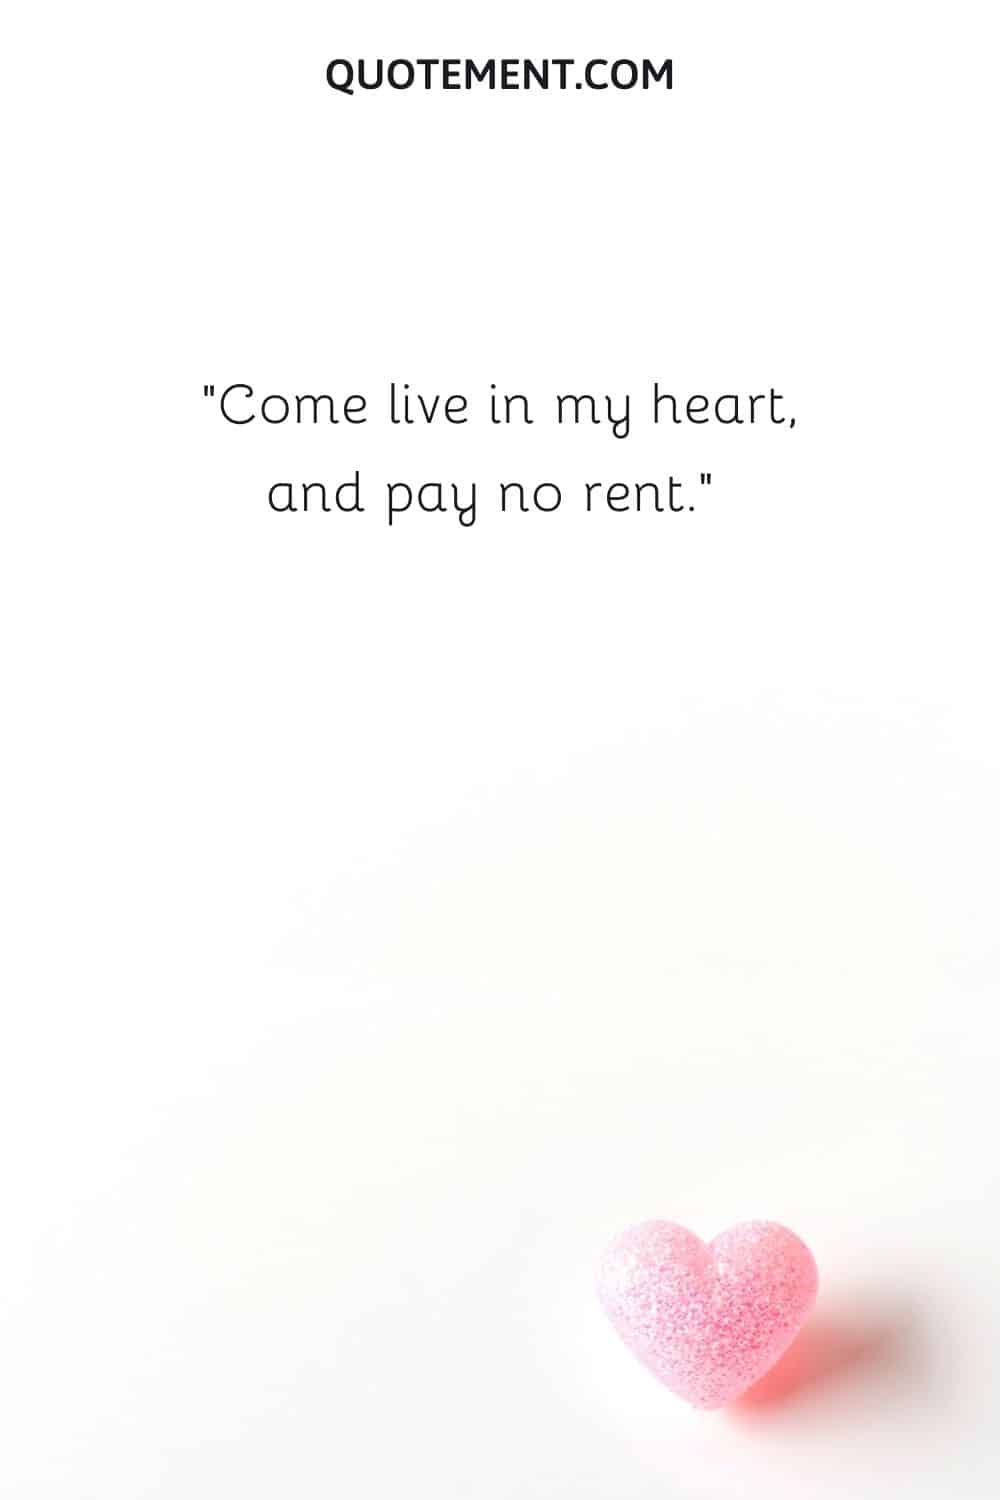 Come live in my heart, and pay no rent.